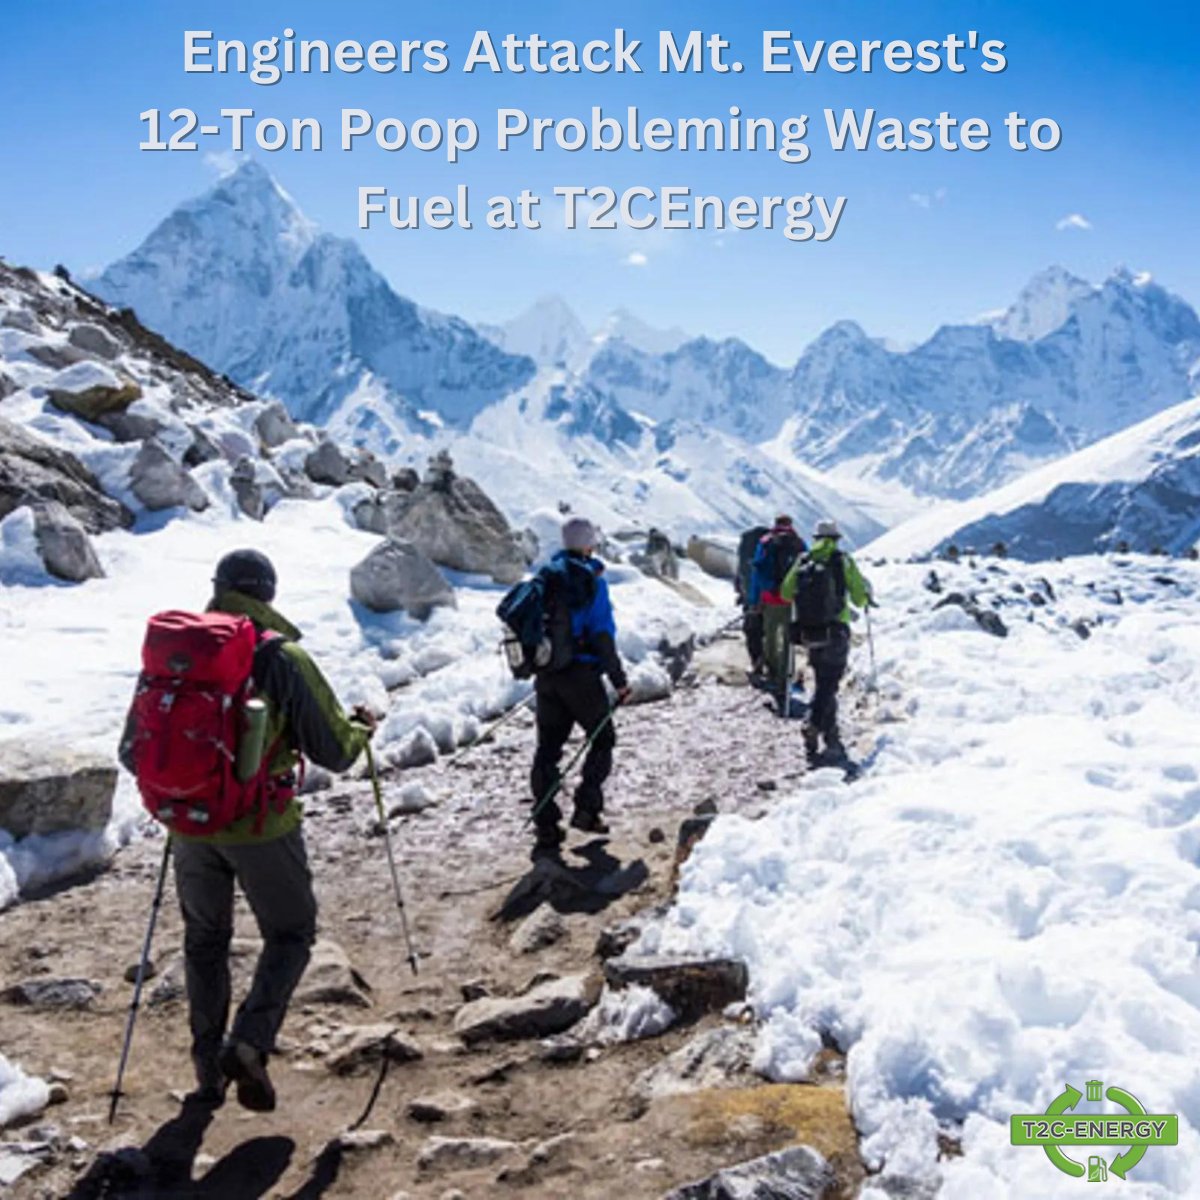 Really interesting article on the waste problem in Nepal and Mount Everest.

bit.ly/3wWpww7

#wastetofuel #environment #mteverest